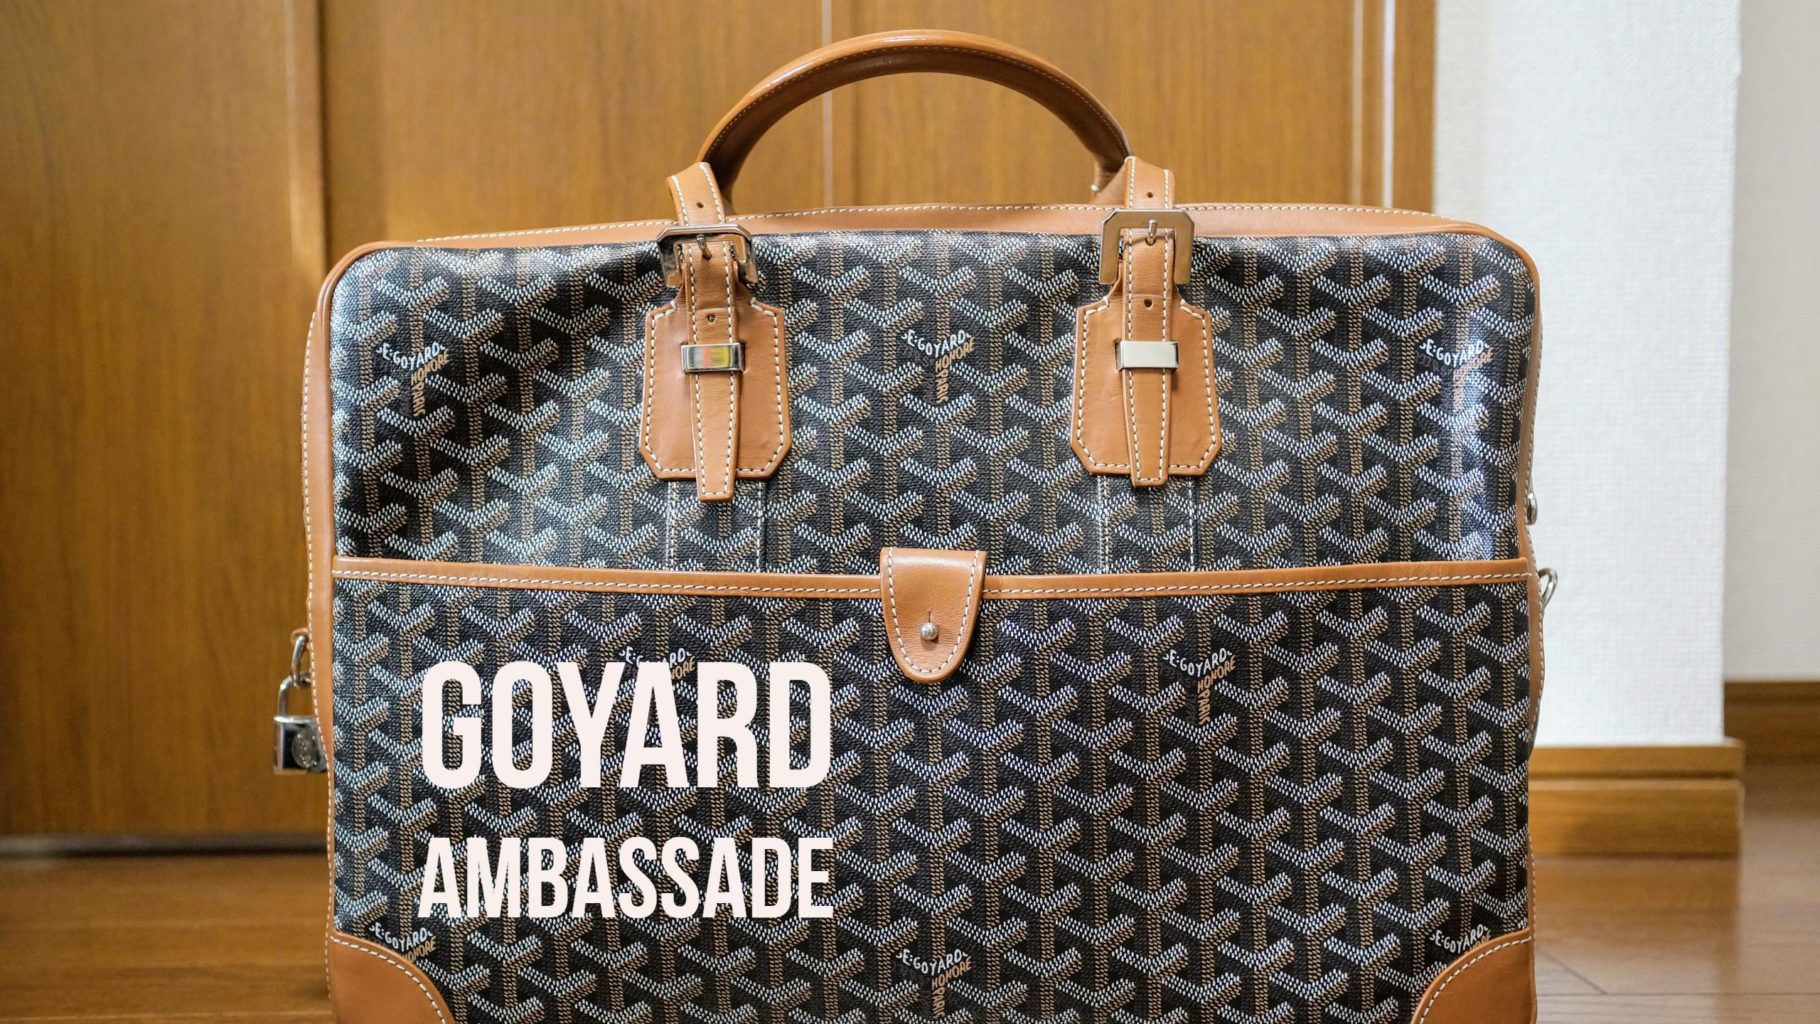 Super Gorgeous Briefcase that Works as an Everyday Bag - Goyard Ambassade –  A Review - whattodotomorrow